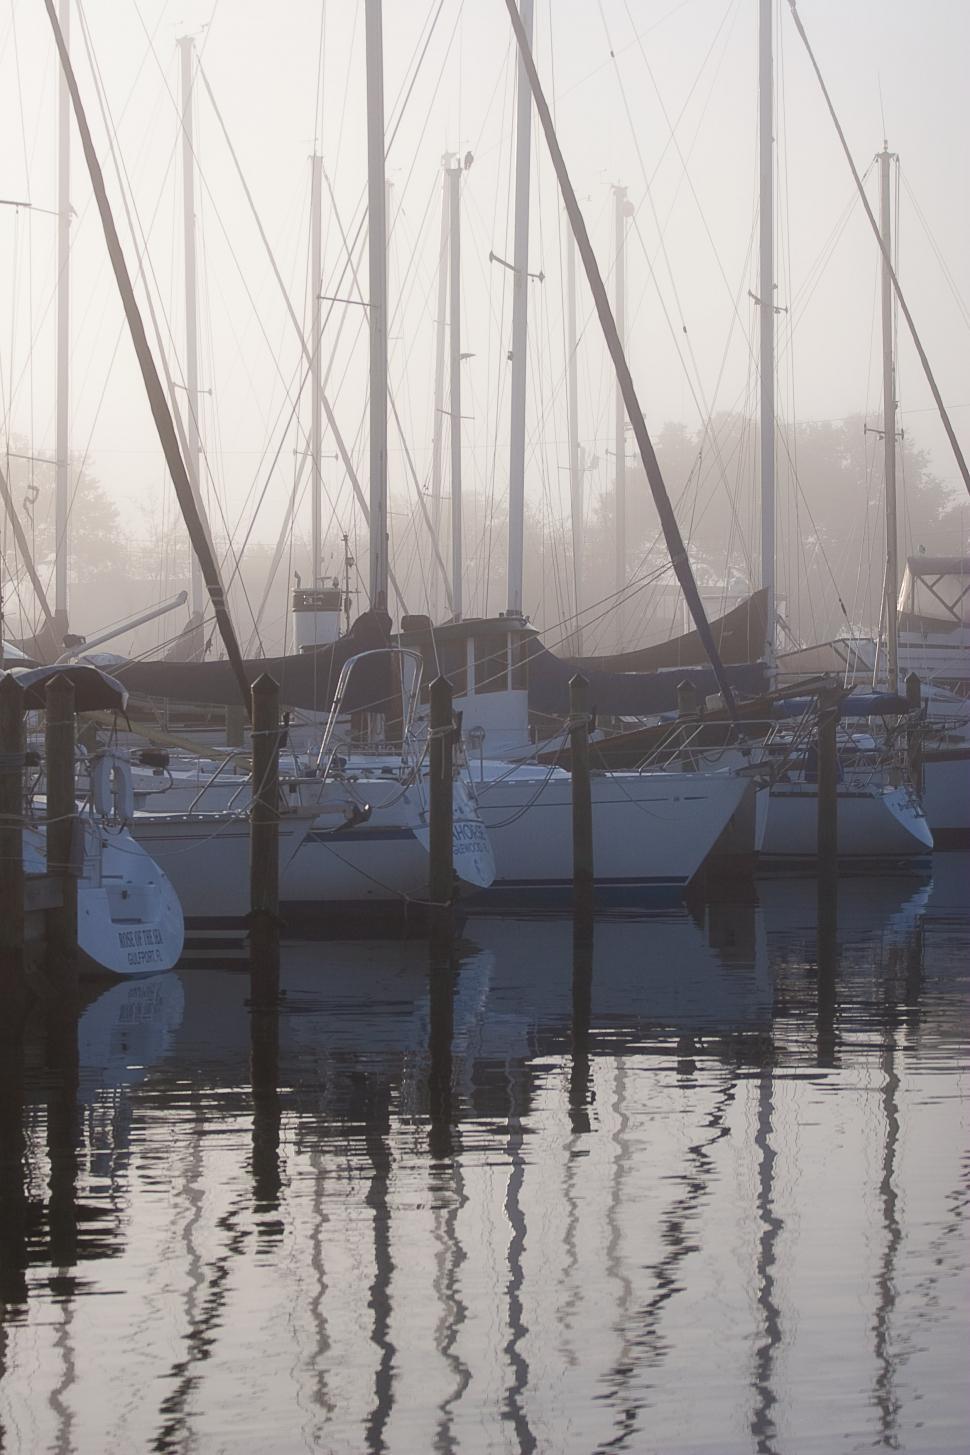 Free Image of Sailboats Docked in Harbor 